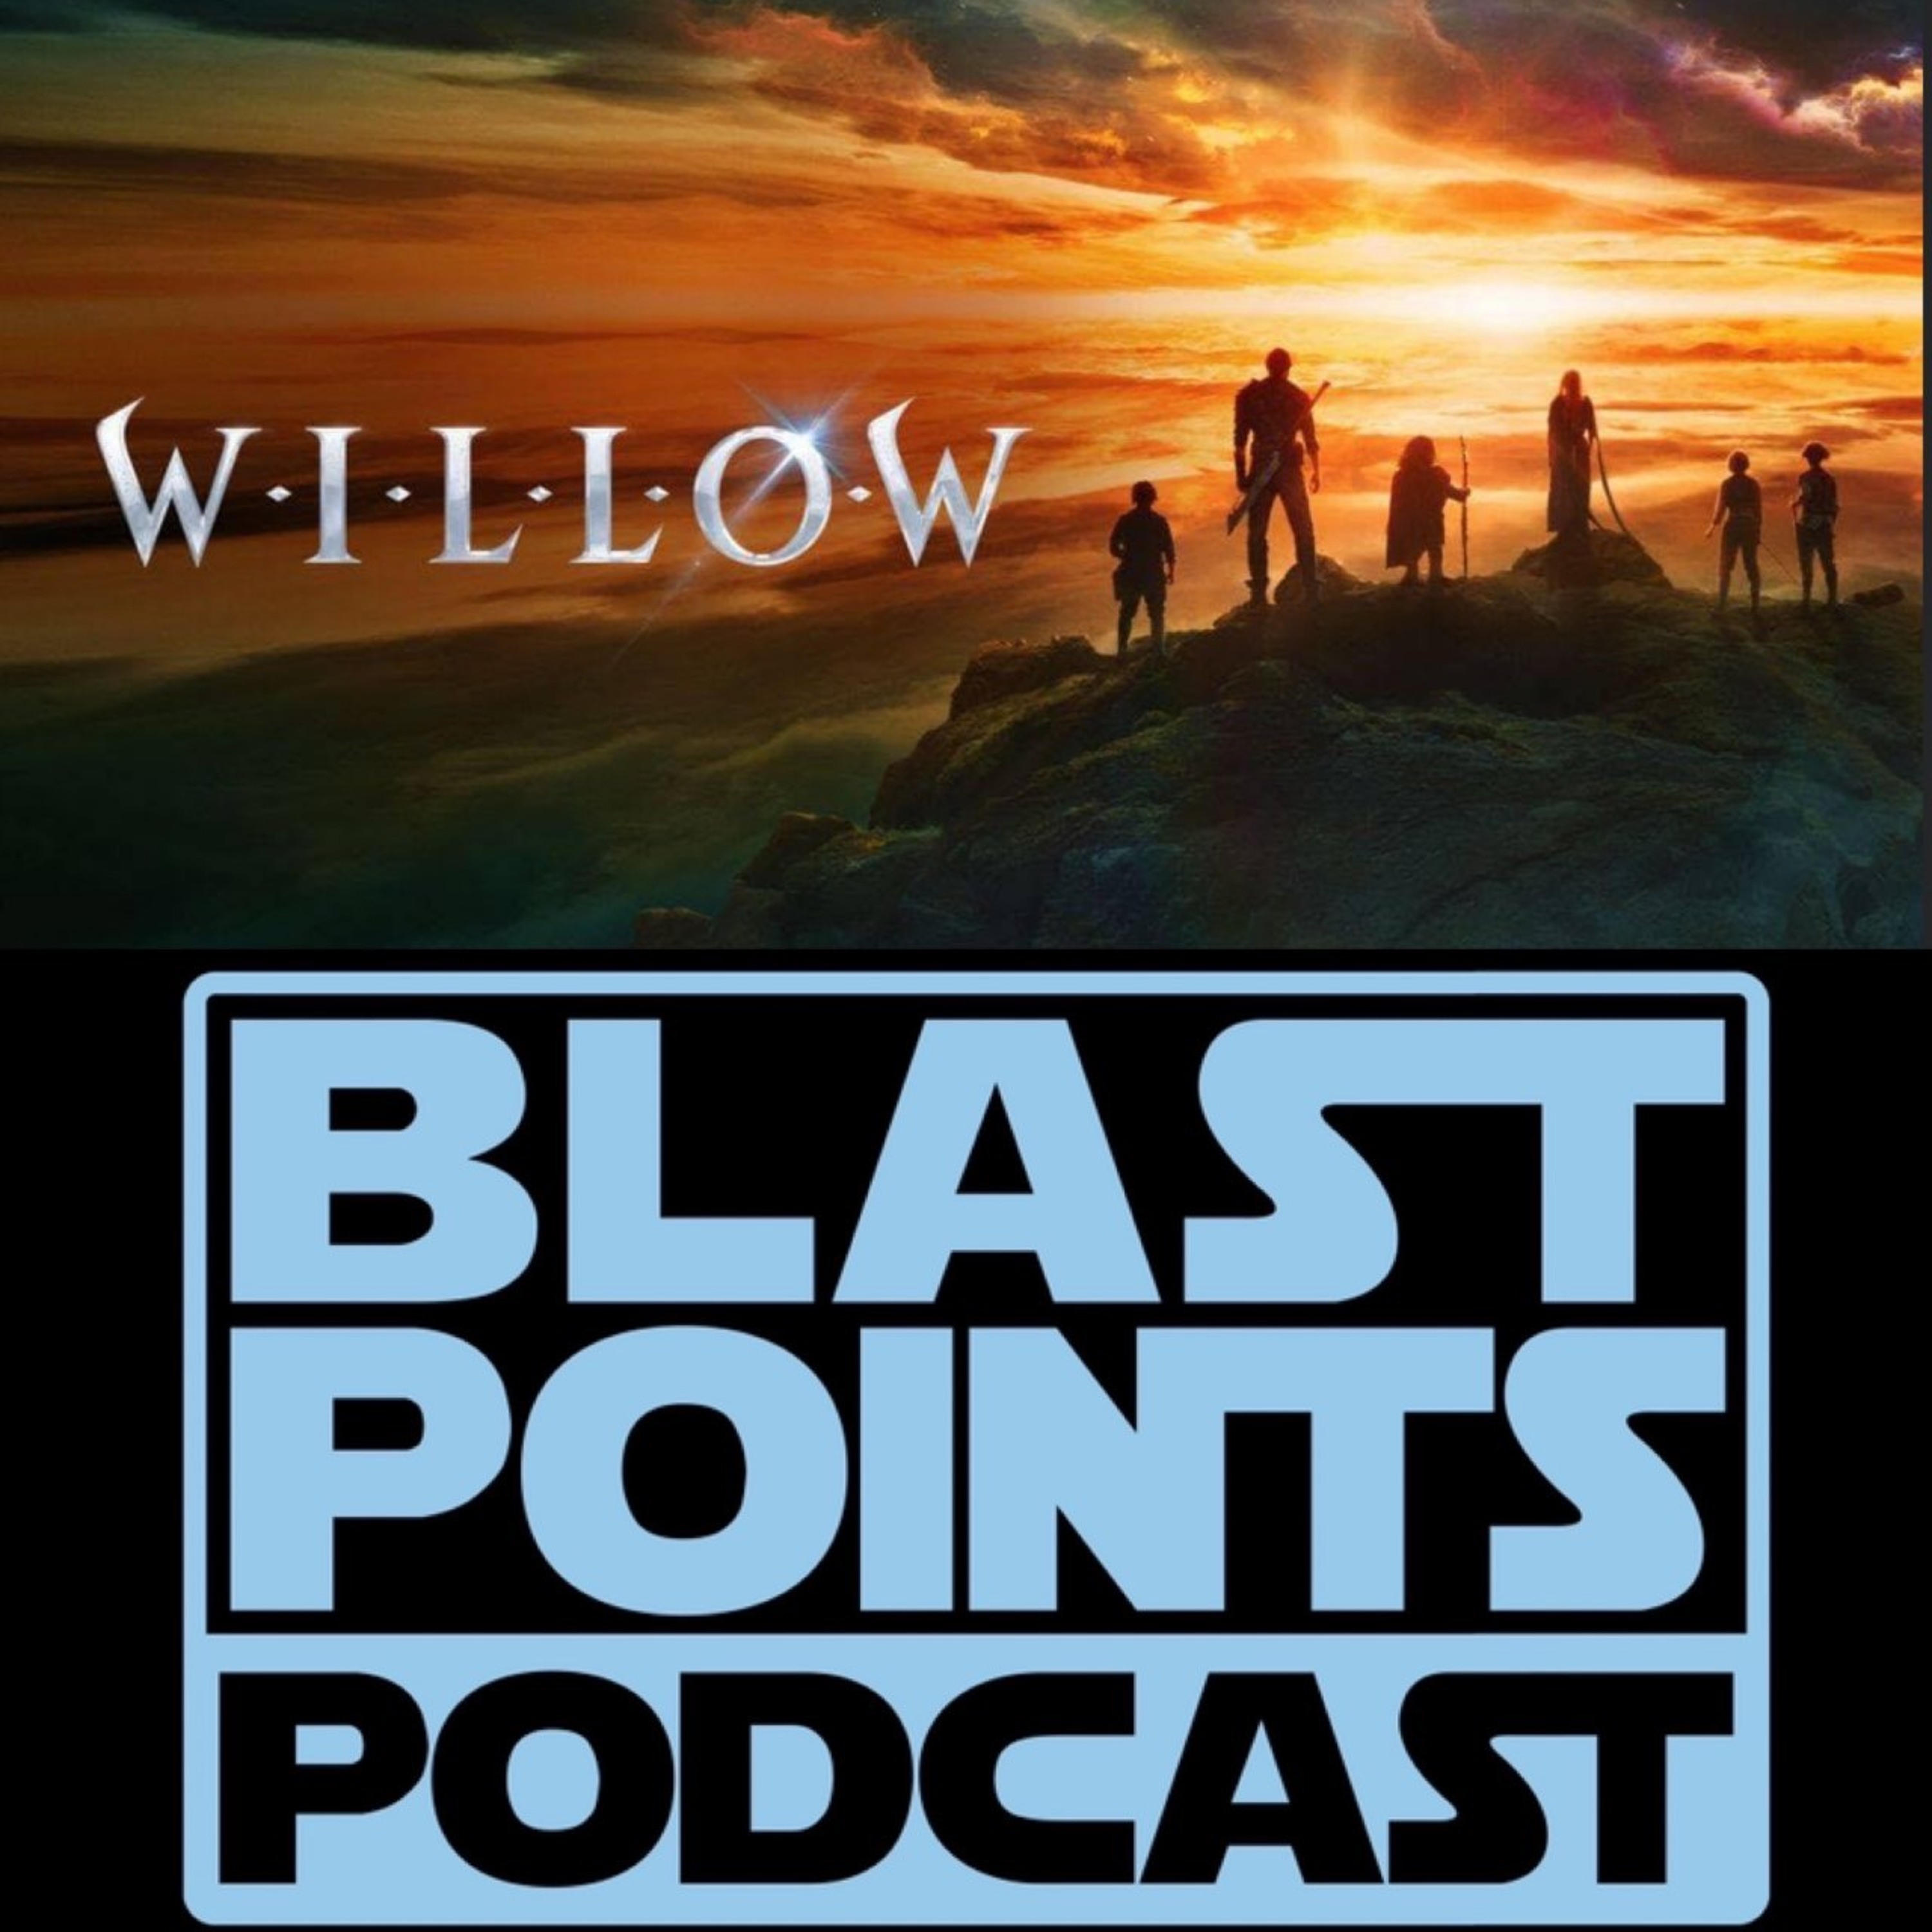 Episode 338 - WILLOW POINTS (BROWNIE POINTS) - Willow Episodes 1 And 2 Discussion